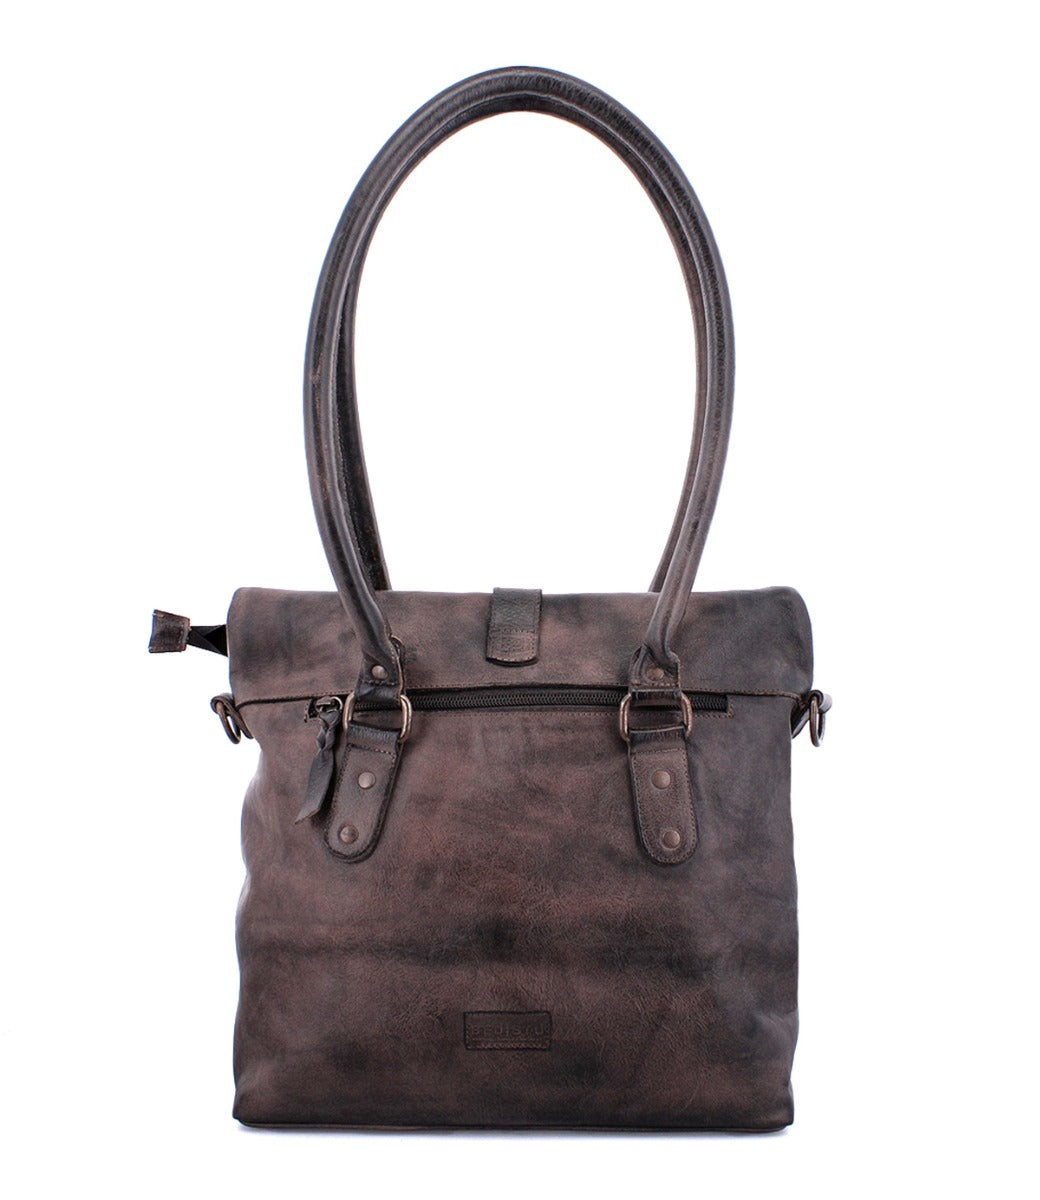 A brown leather Rachel handbag with two handles by Bed Stu.